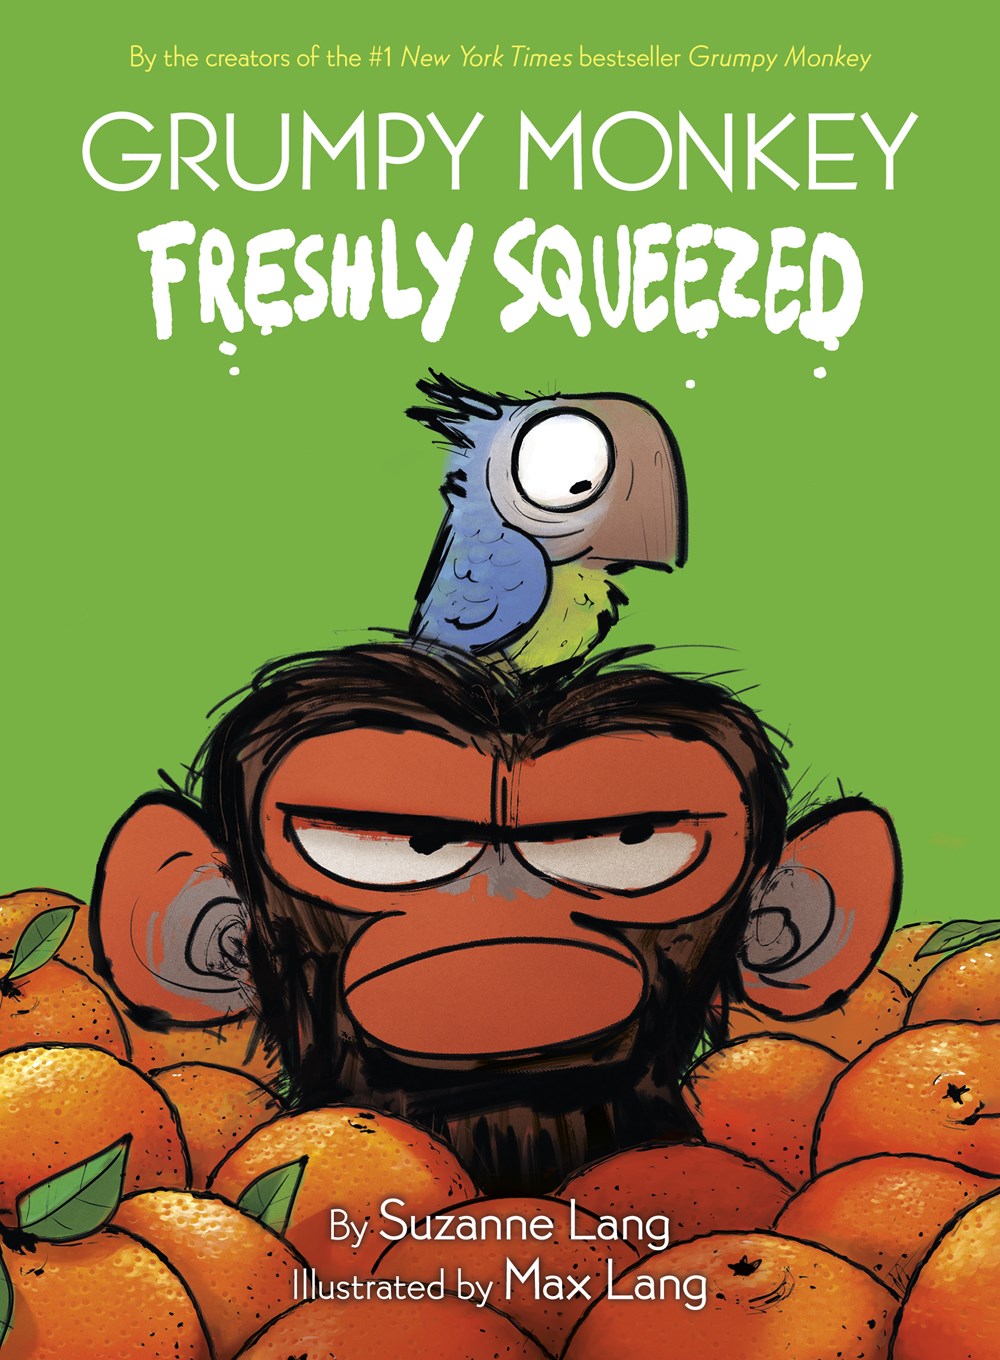 Grumpy Monkey Freshly Squeezed : A Graphic Novel Chapter Book